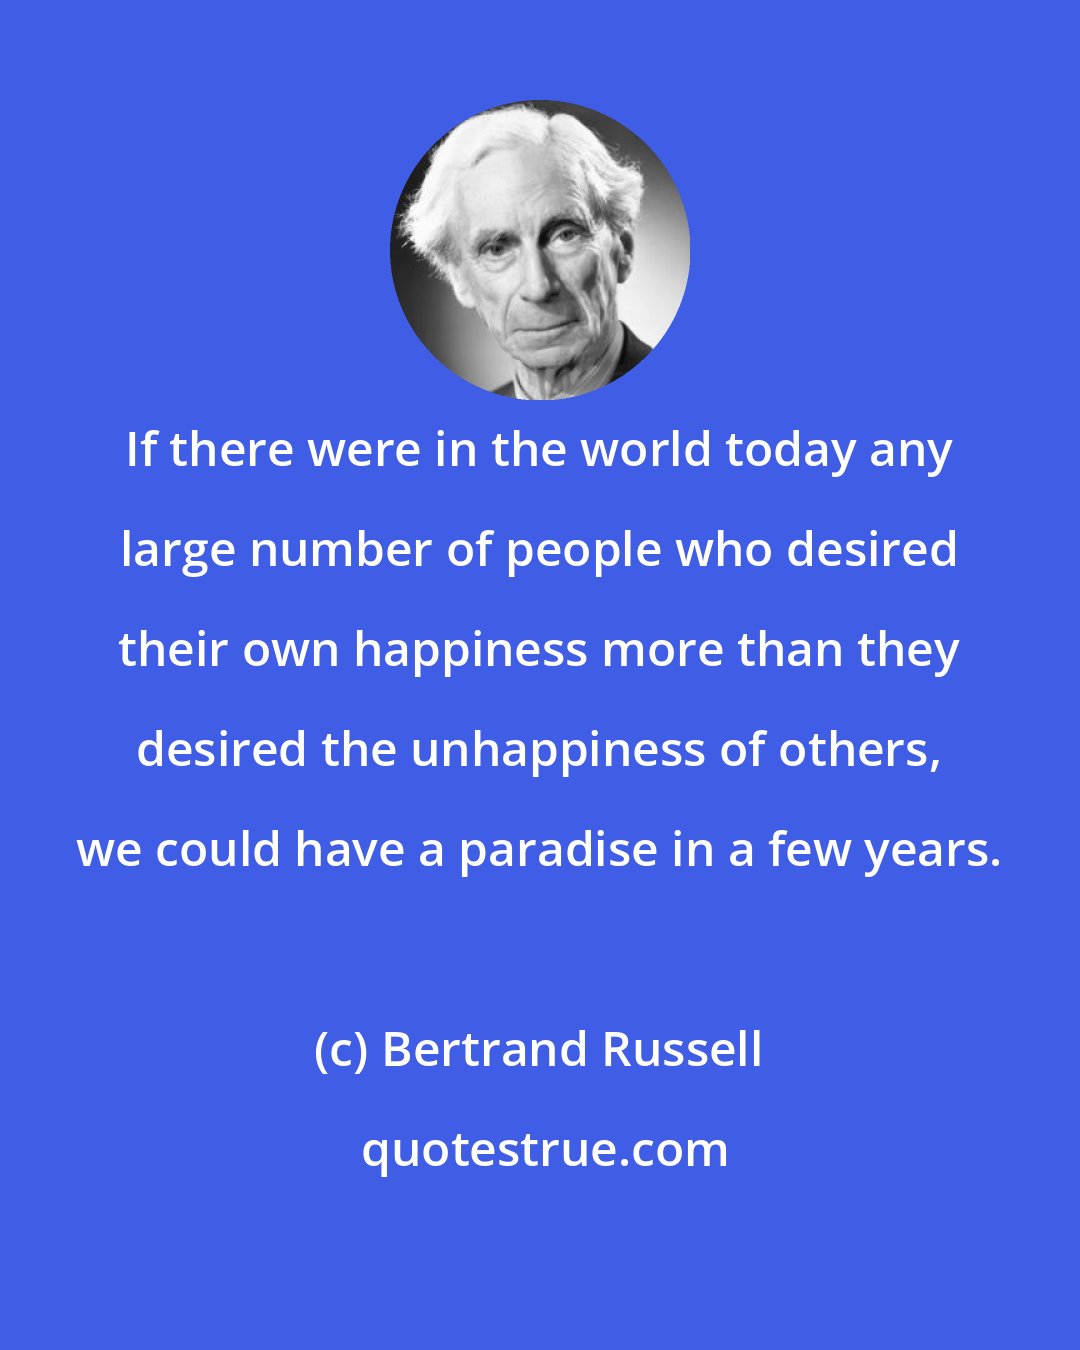 Bertrand Russell: If there were in the world today any large number of people who desired their own happiness more than they desired the unhappiness of others, we could have a paradise in a few years.